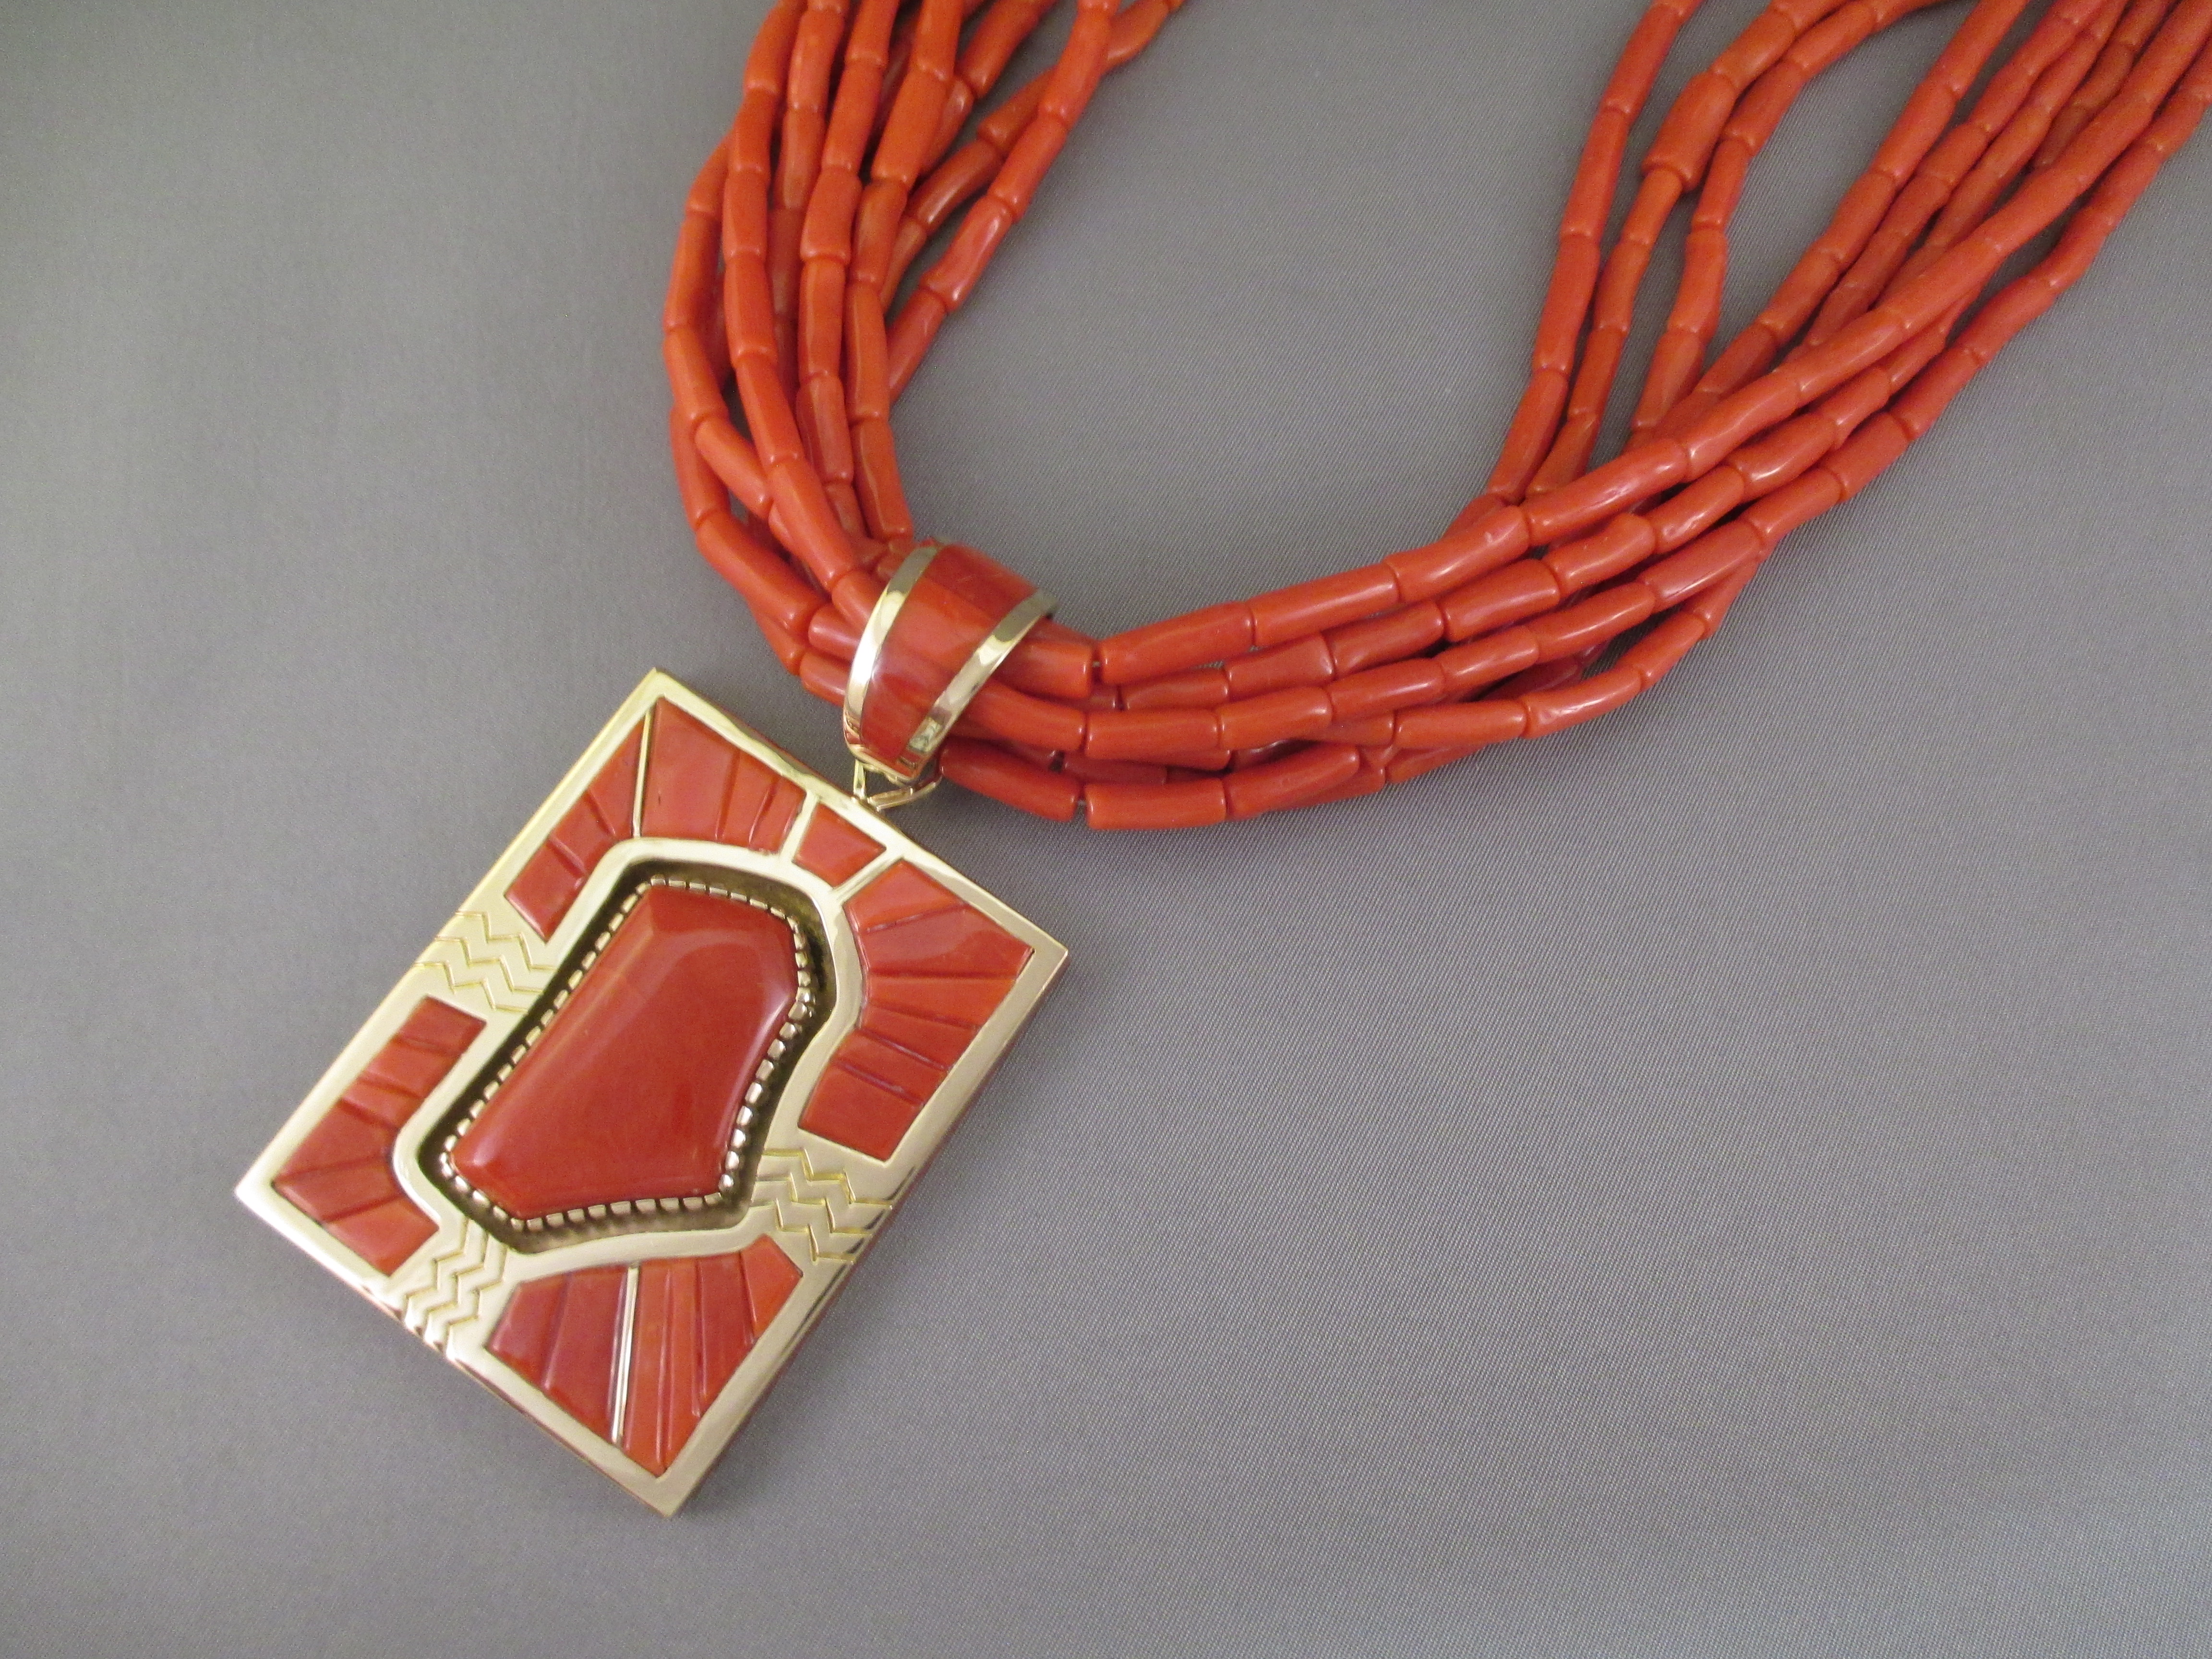 Fine Native American Jewelry - Gold & Coral Necklace by Navajo jeweler, Michael Perry FOR SALE $19,500-